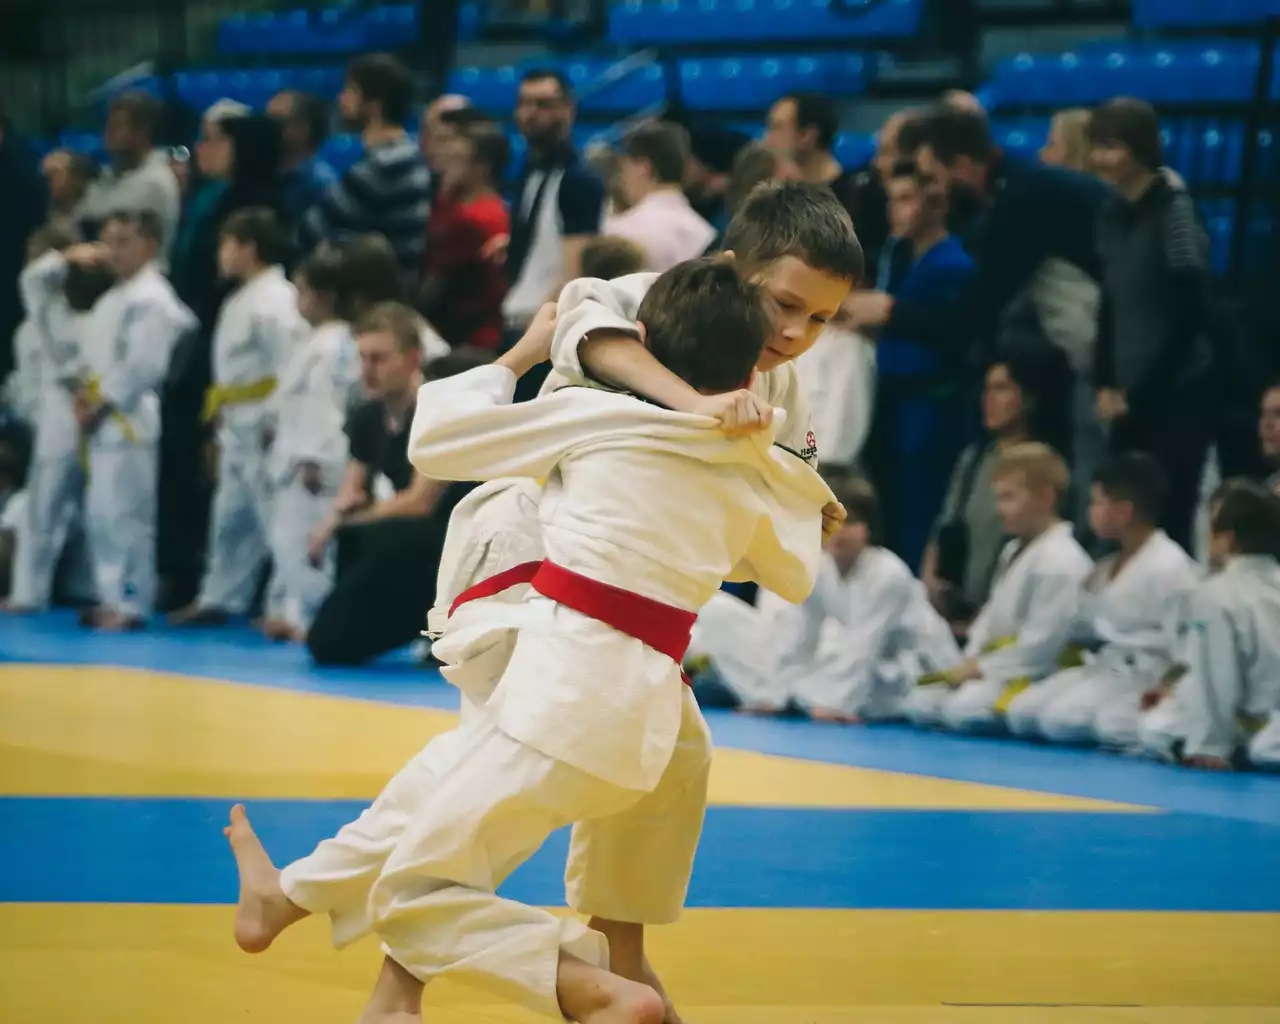 Judo Competitions for Kids: How to Prepare Children for Judo Competitions